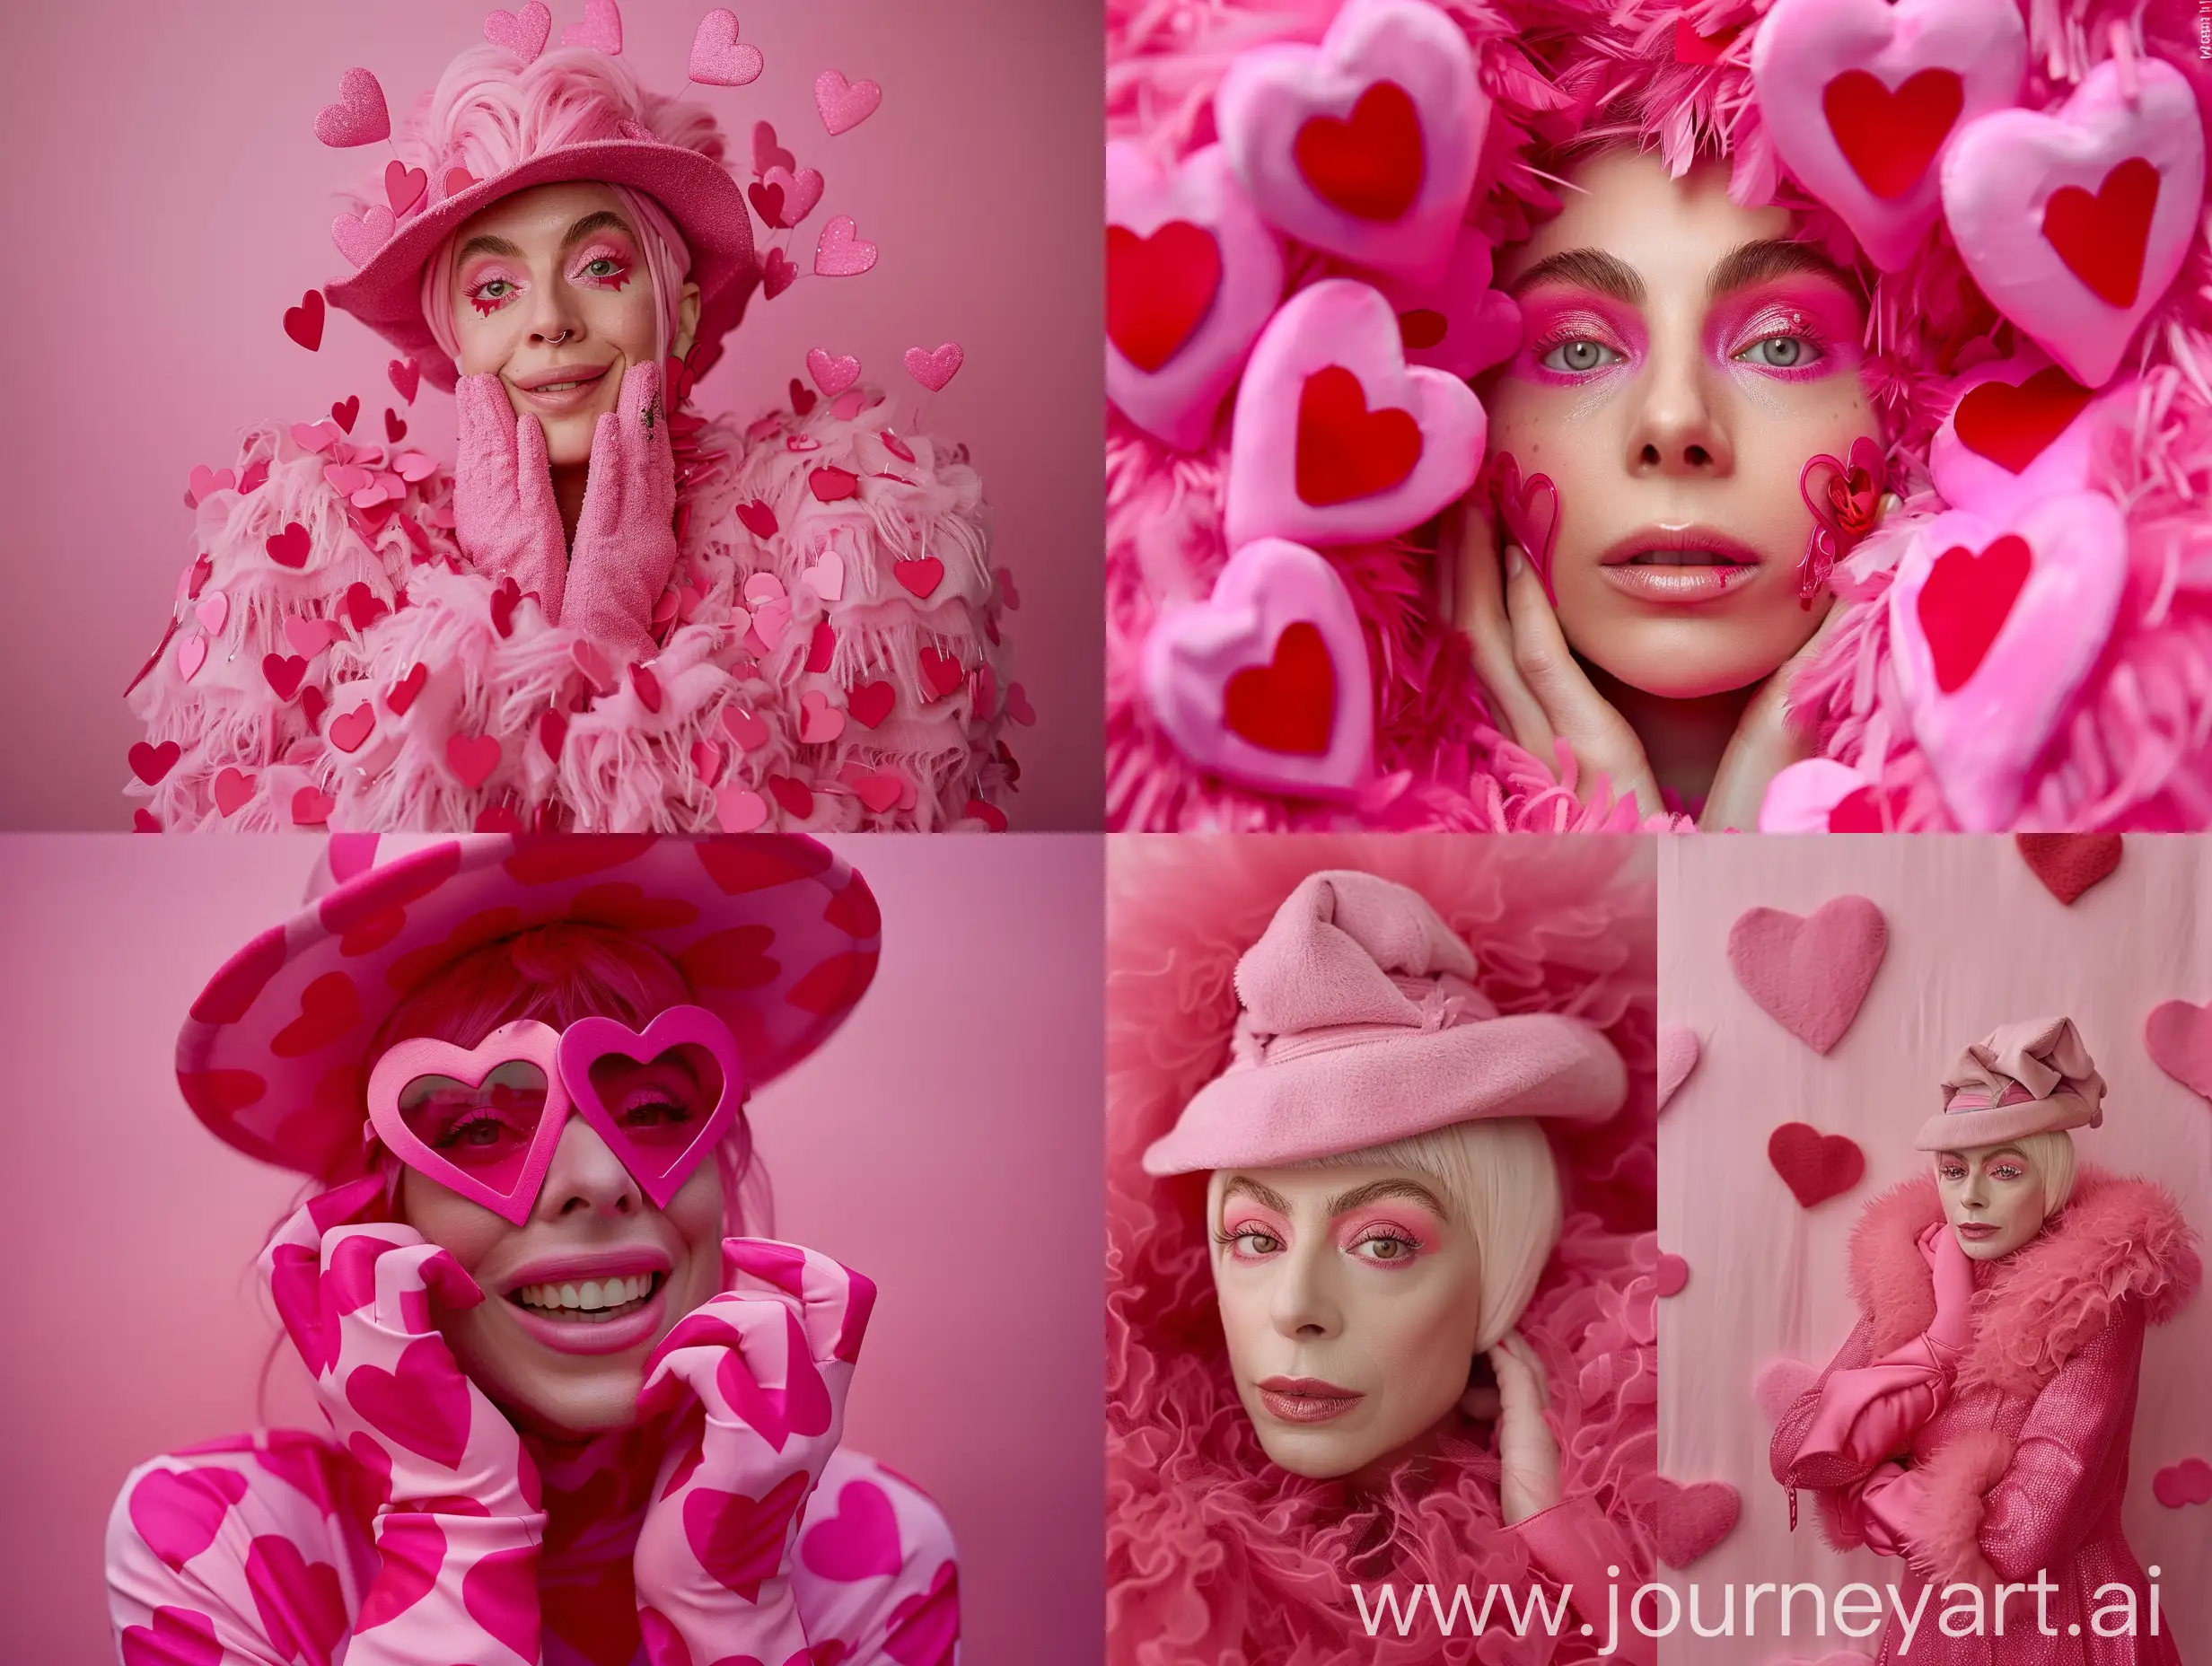 Cheerful-Lovecore-Fashion-Photography-with-Pink-Accents-and-Hearts